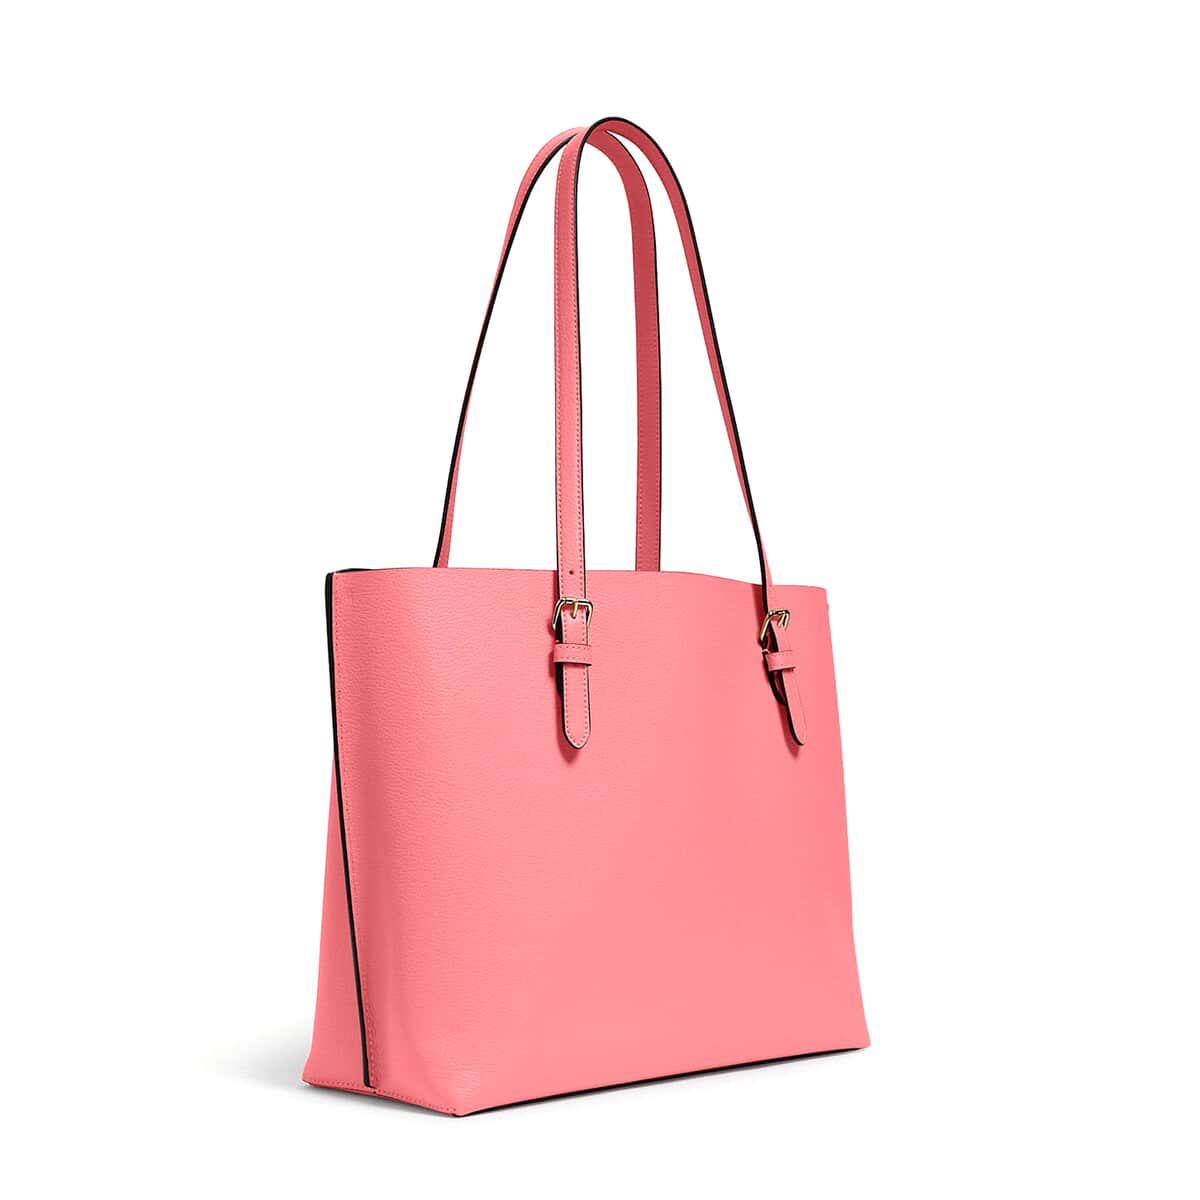 Coach Pink Pebbled Leather Mollie Tote Bag (13.25"x5"x11") (Ships in 8-10 Business Days) image number 1